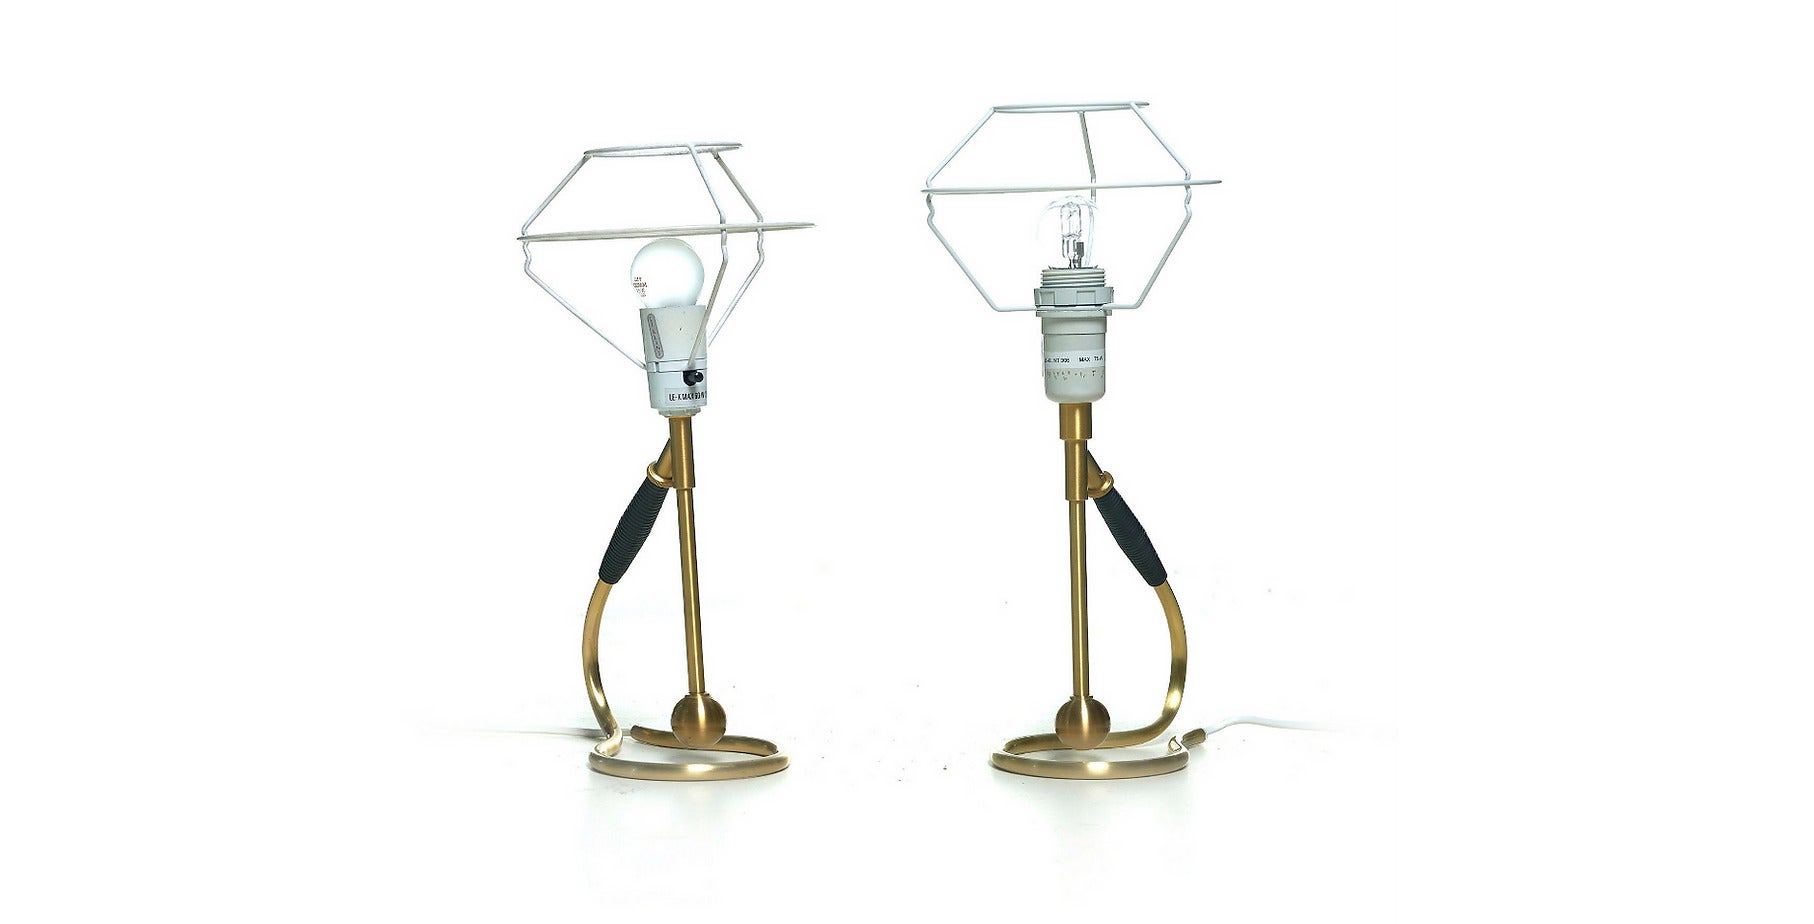 Danish Pair of Le Klint 306 Adjustable Brass Table / Wall Lamps, Design Denmark, 1945 For Sale